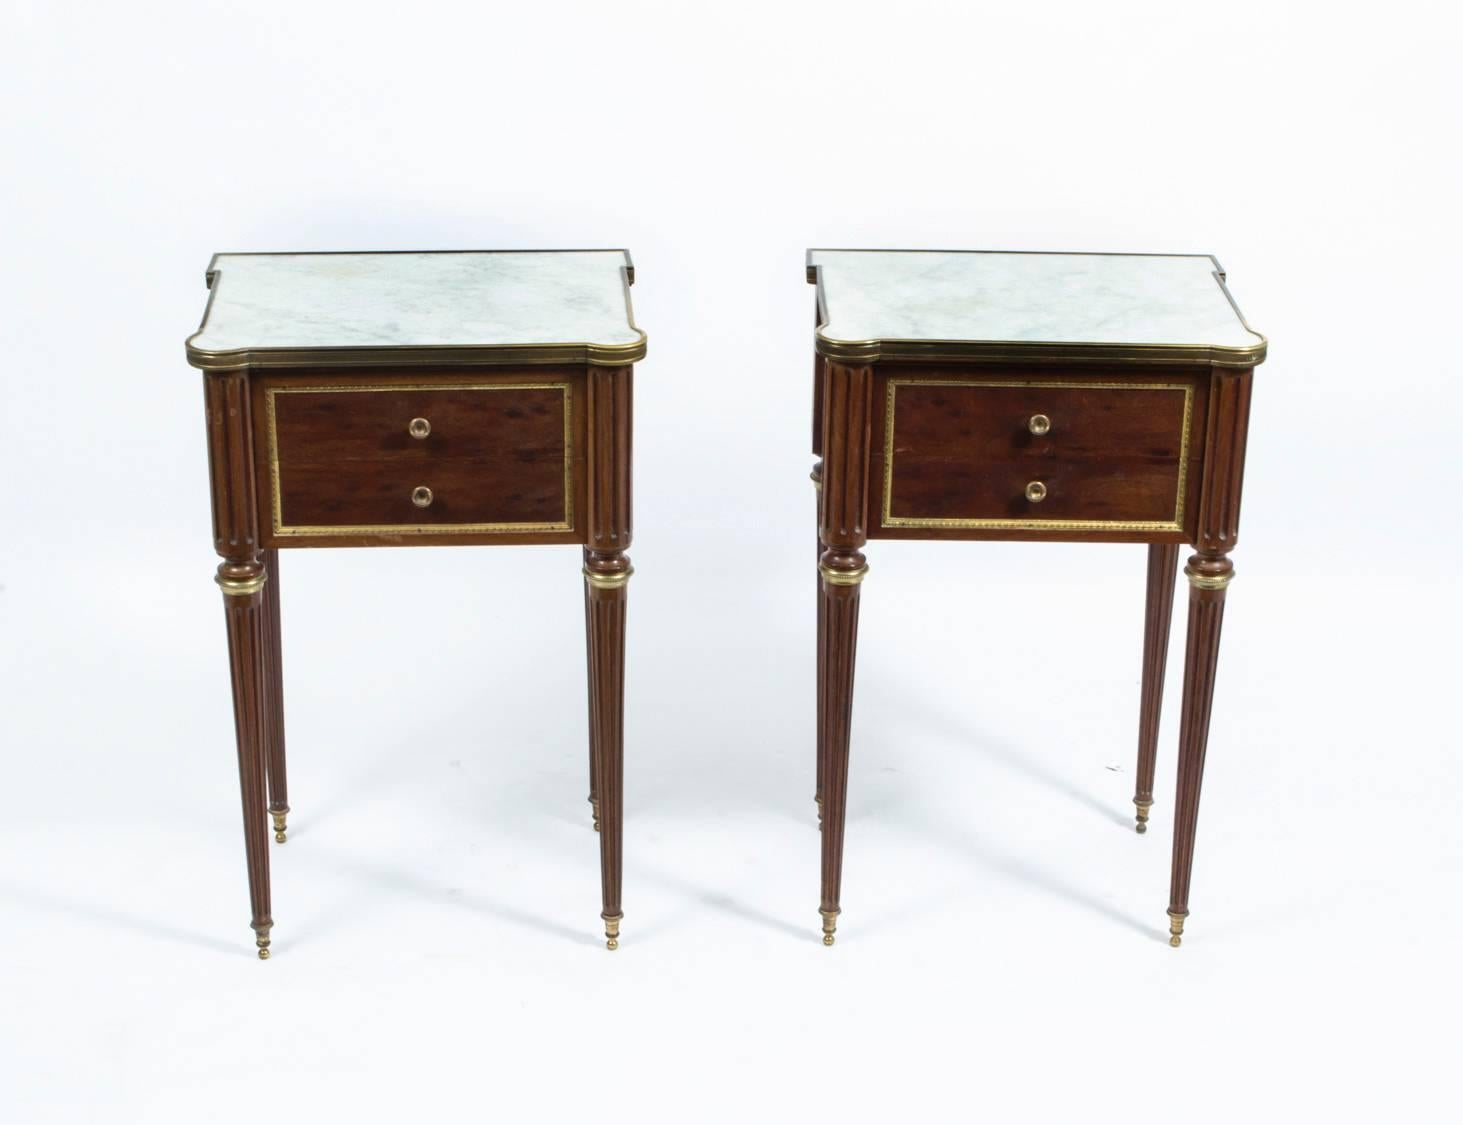 A thoroughly delightful pair of antique French bedside cabinets, circa 1900 in date, typical of the Empire Revival style which was especially popular at the time.

They are have been accomplished in mahogany with gilded ormolu mounts and stunning